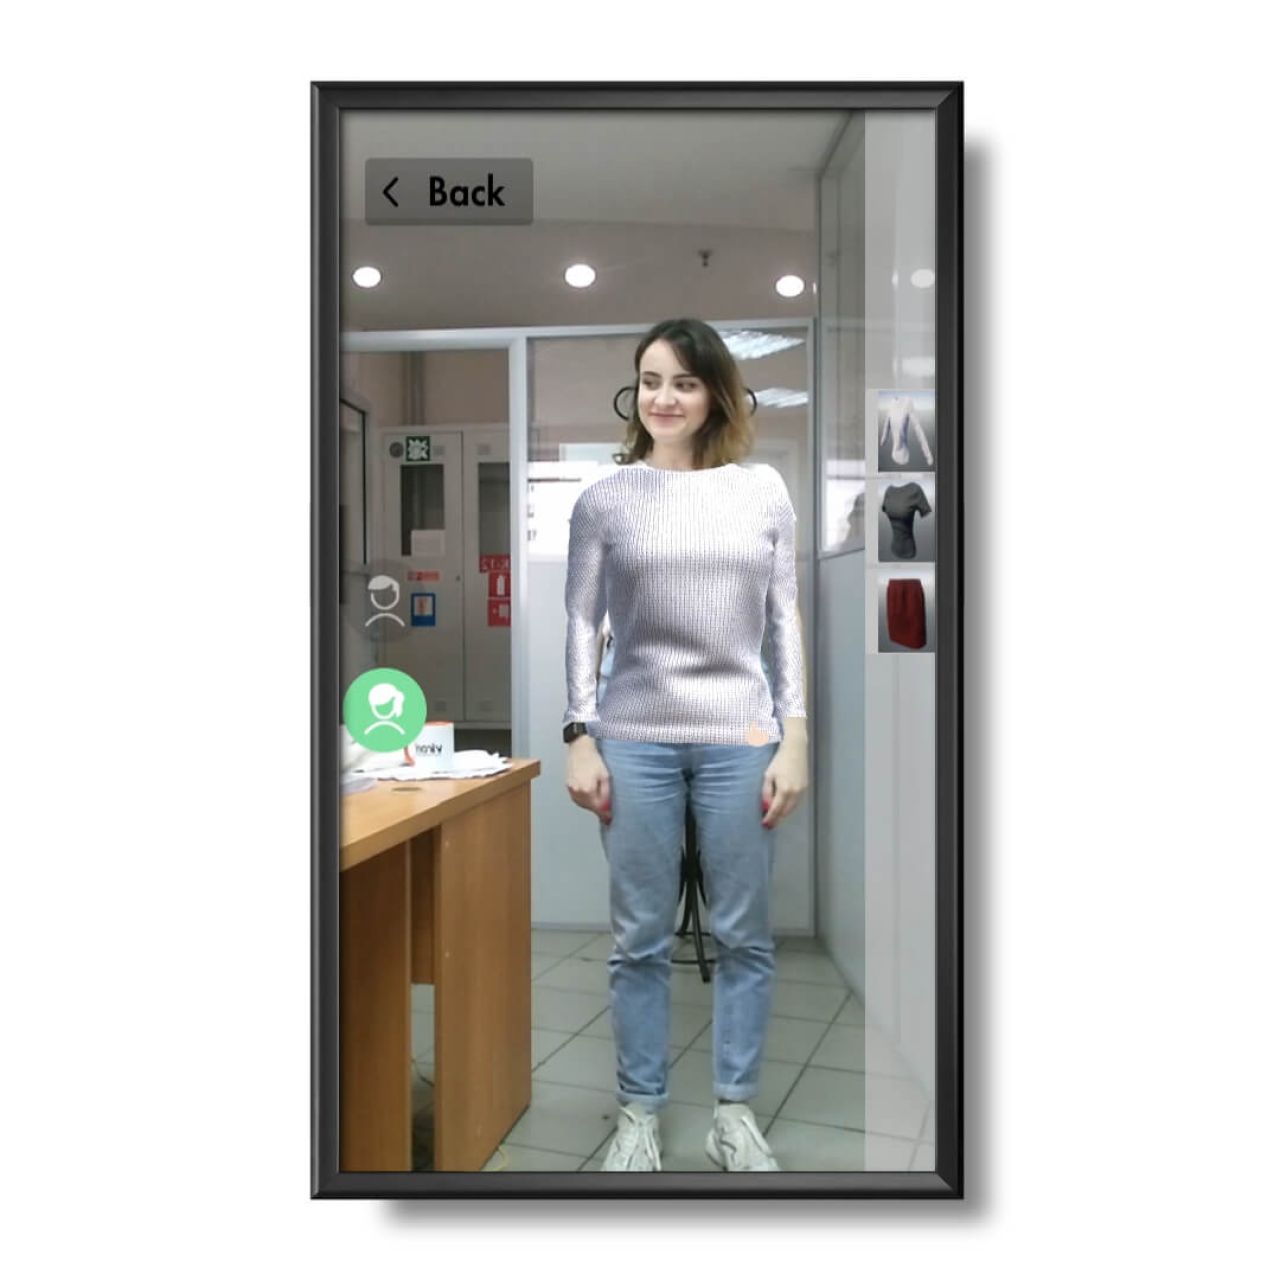 AR Fitting Room preview